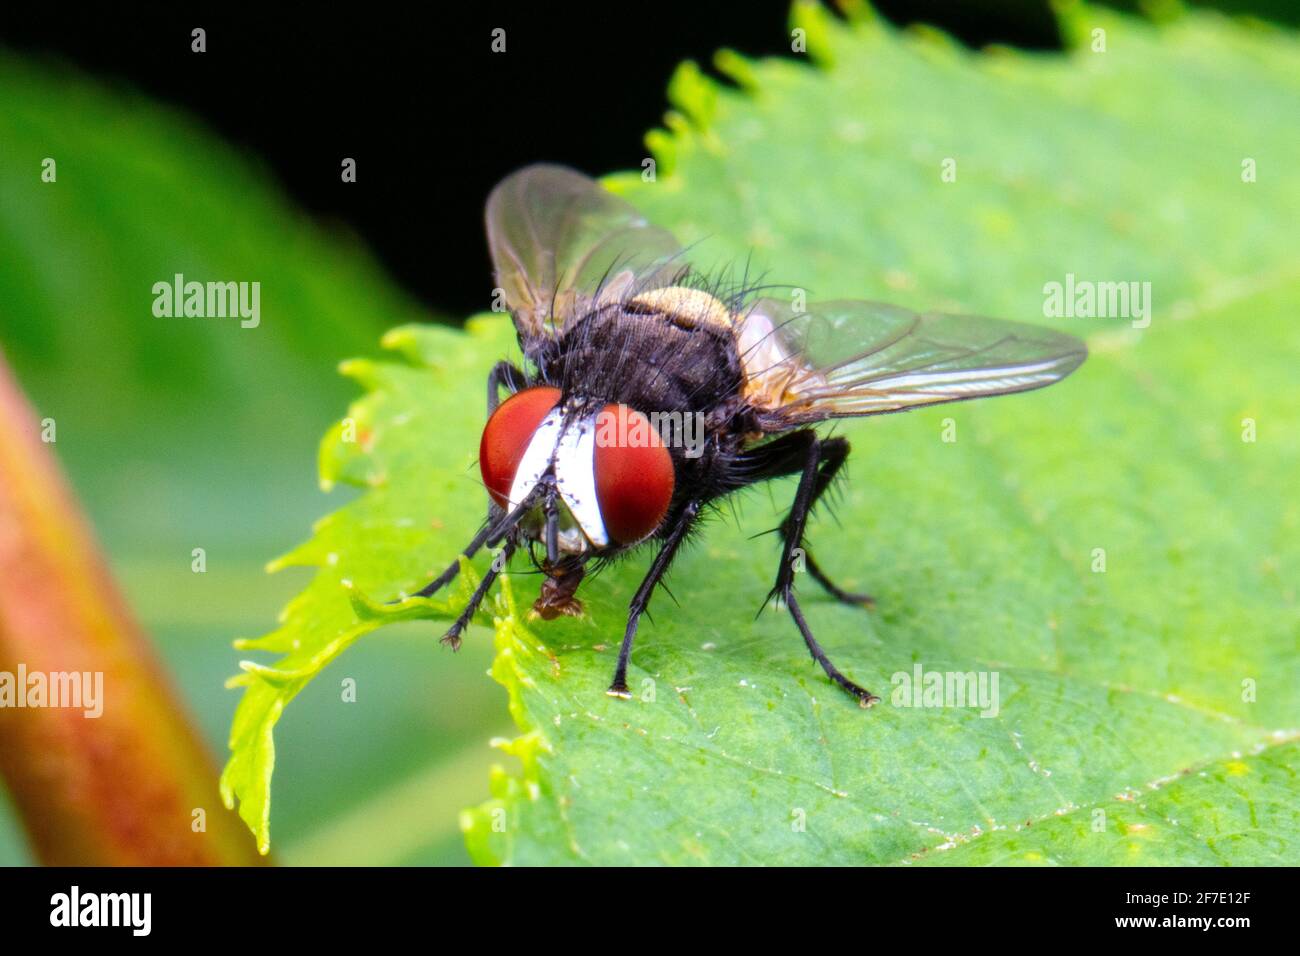 A portrait of a White-faced Fly,  Metopia argyrocephala, perched on a leaf. Stock Photo